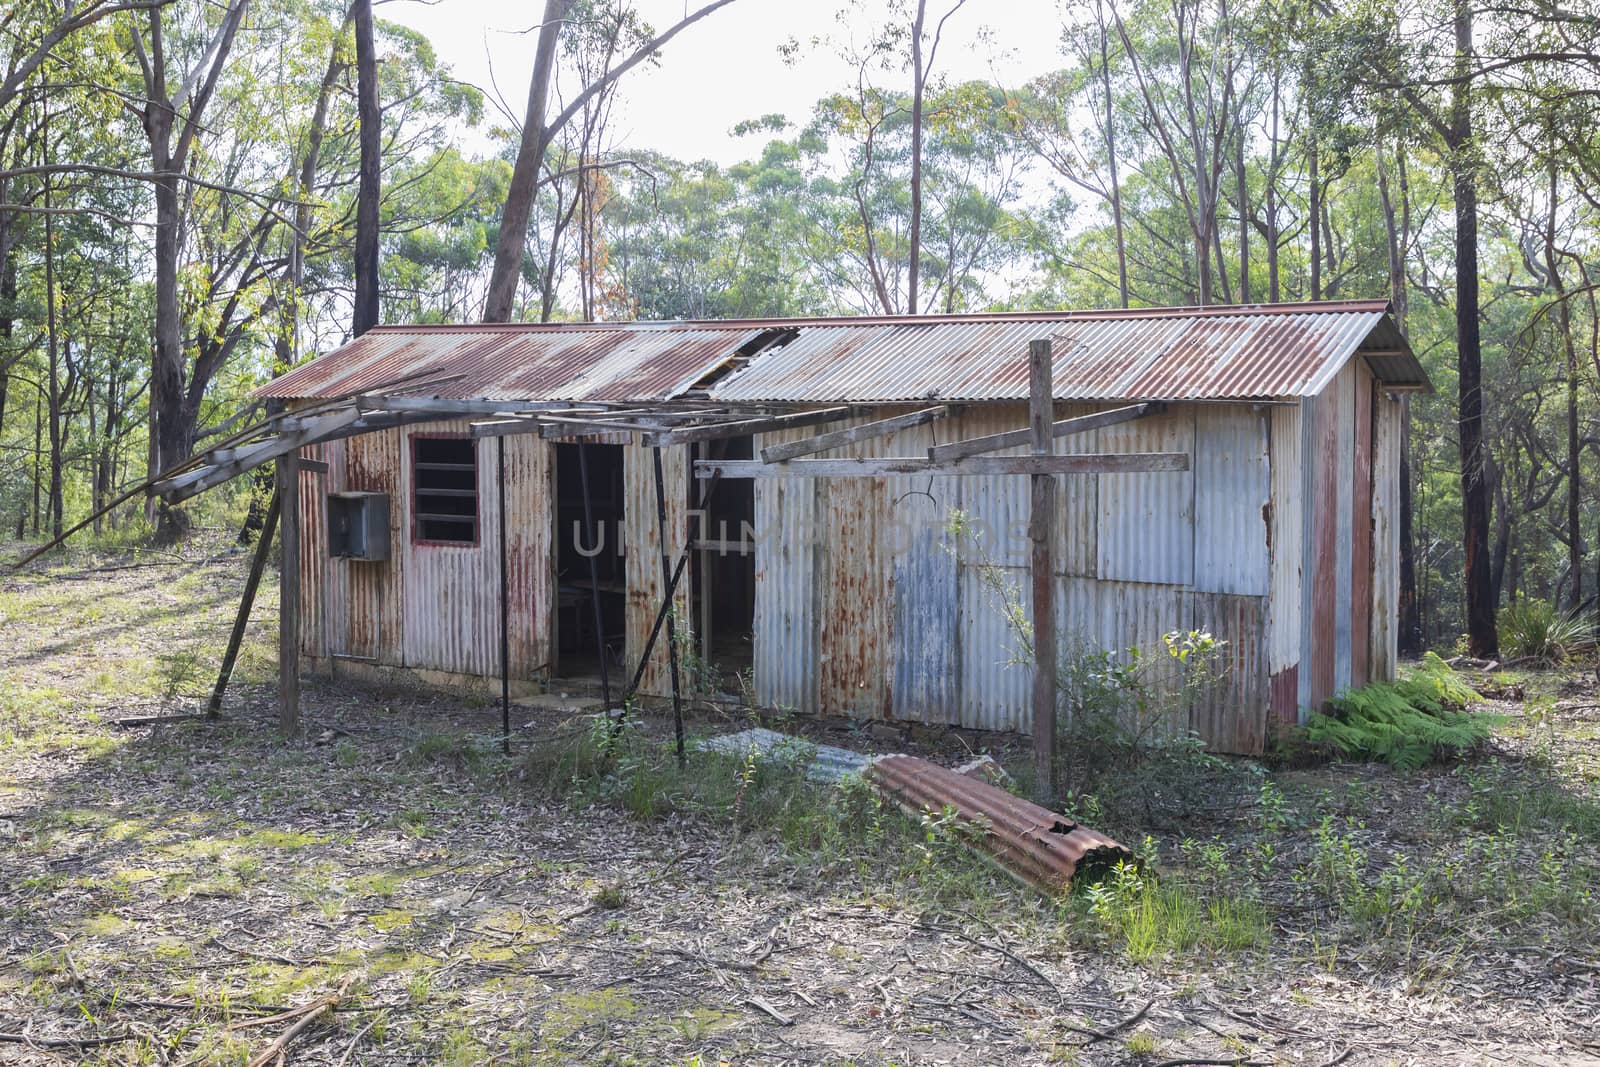 An old dilapidated building in the Wollemi National Park in Australia by WittkePhotos